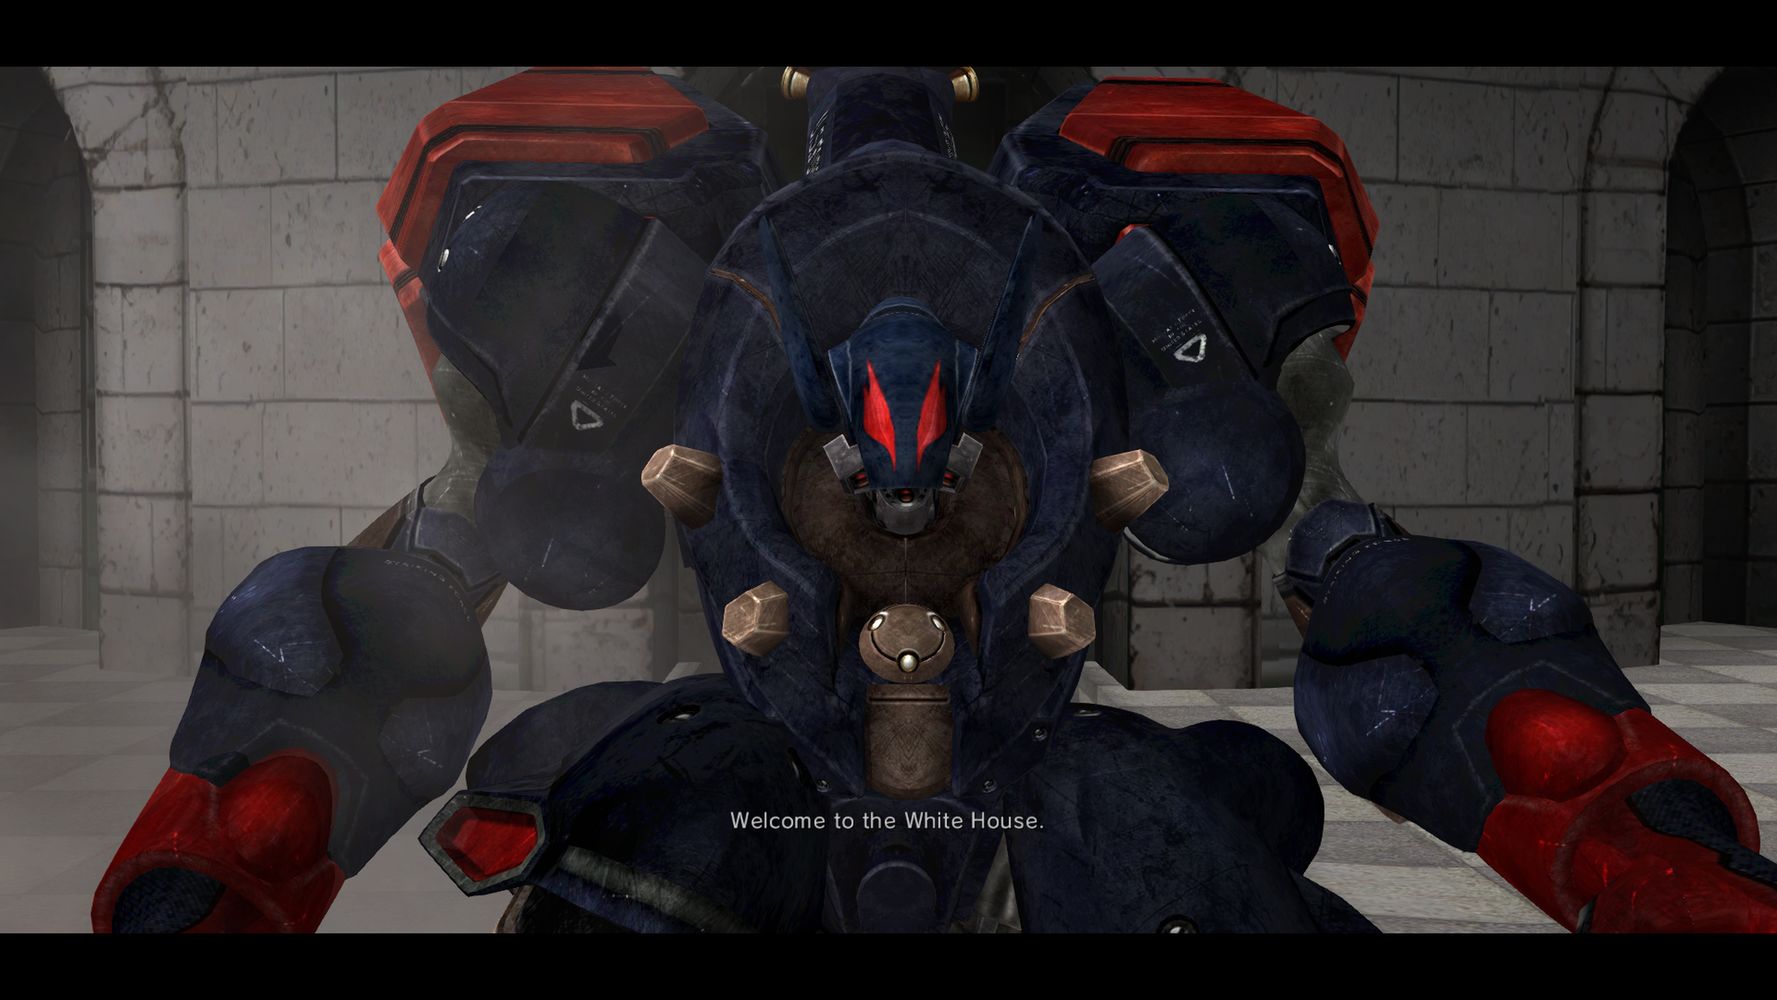 METAL WOLF CHAOS XD - Recensione